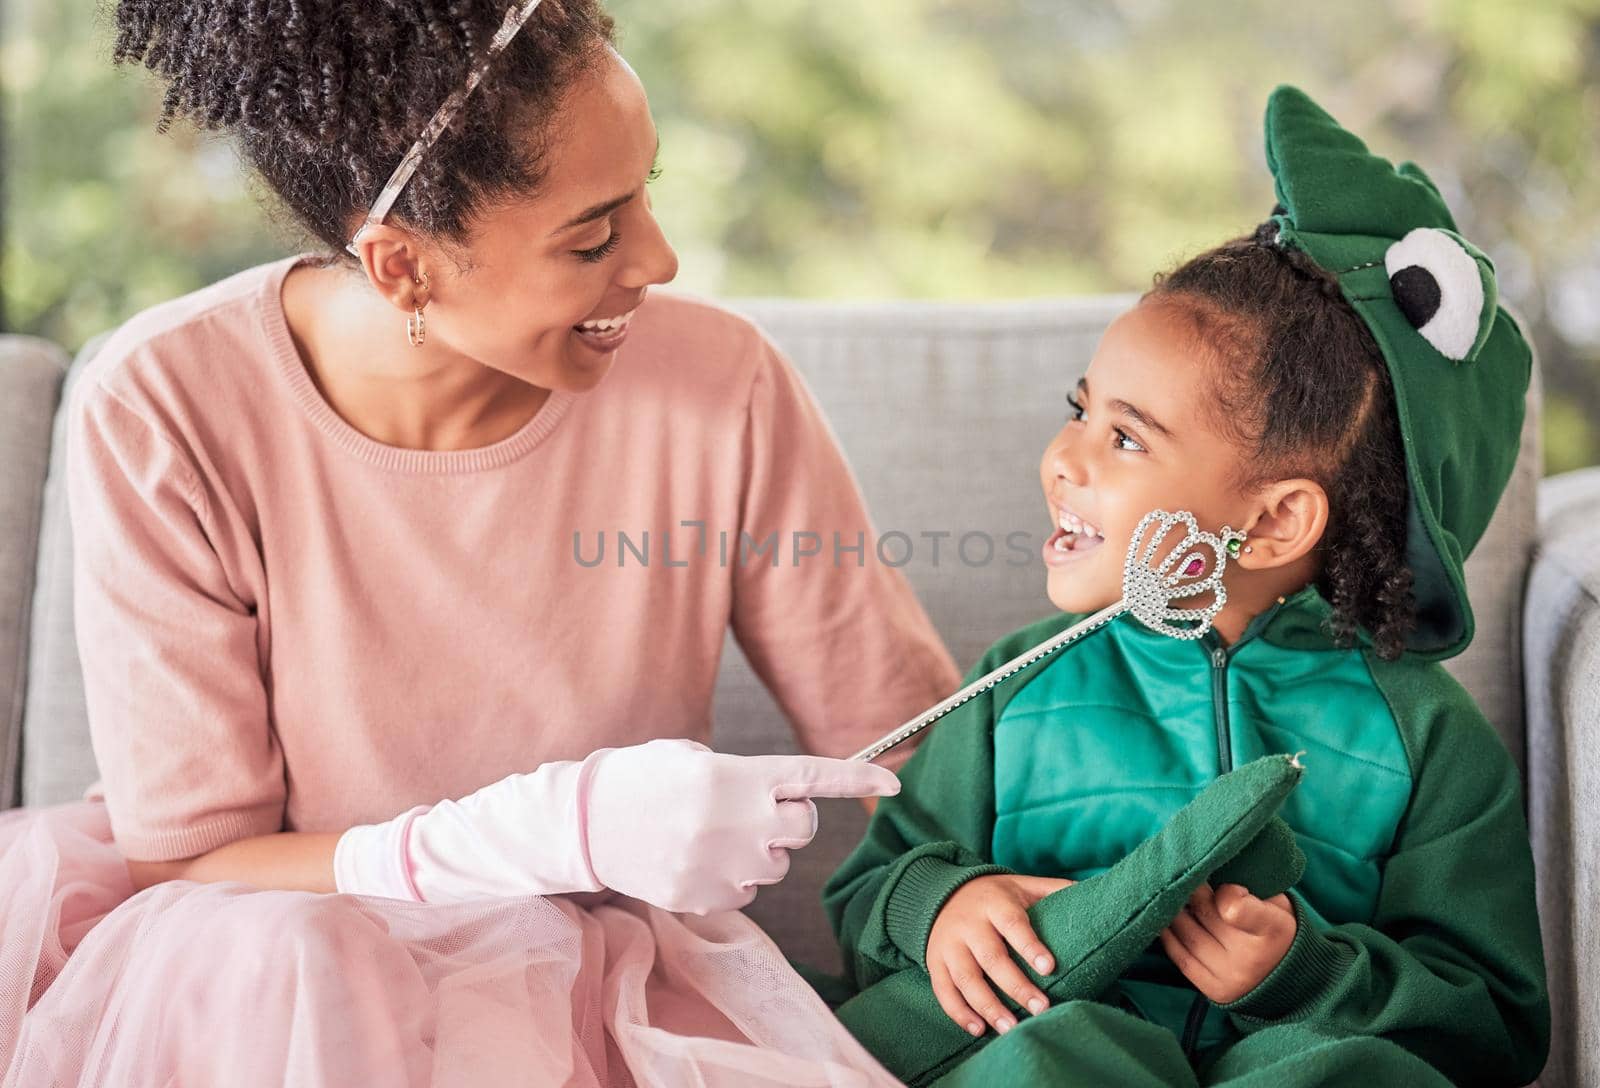 Fantasy, mother and child in halloween costume at home with girl in a dinosaur outfit and mom as a fairy princess. Smile, happy and young kid excited for a holiday celebration with a single parent by YuriArcurs